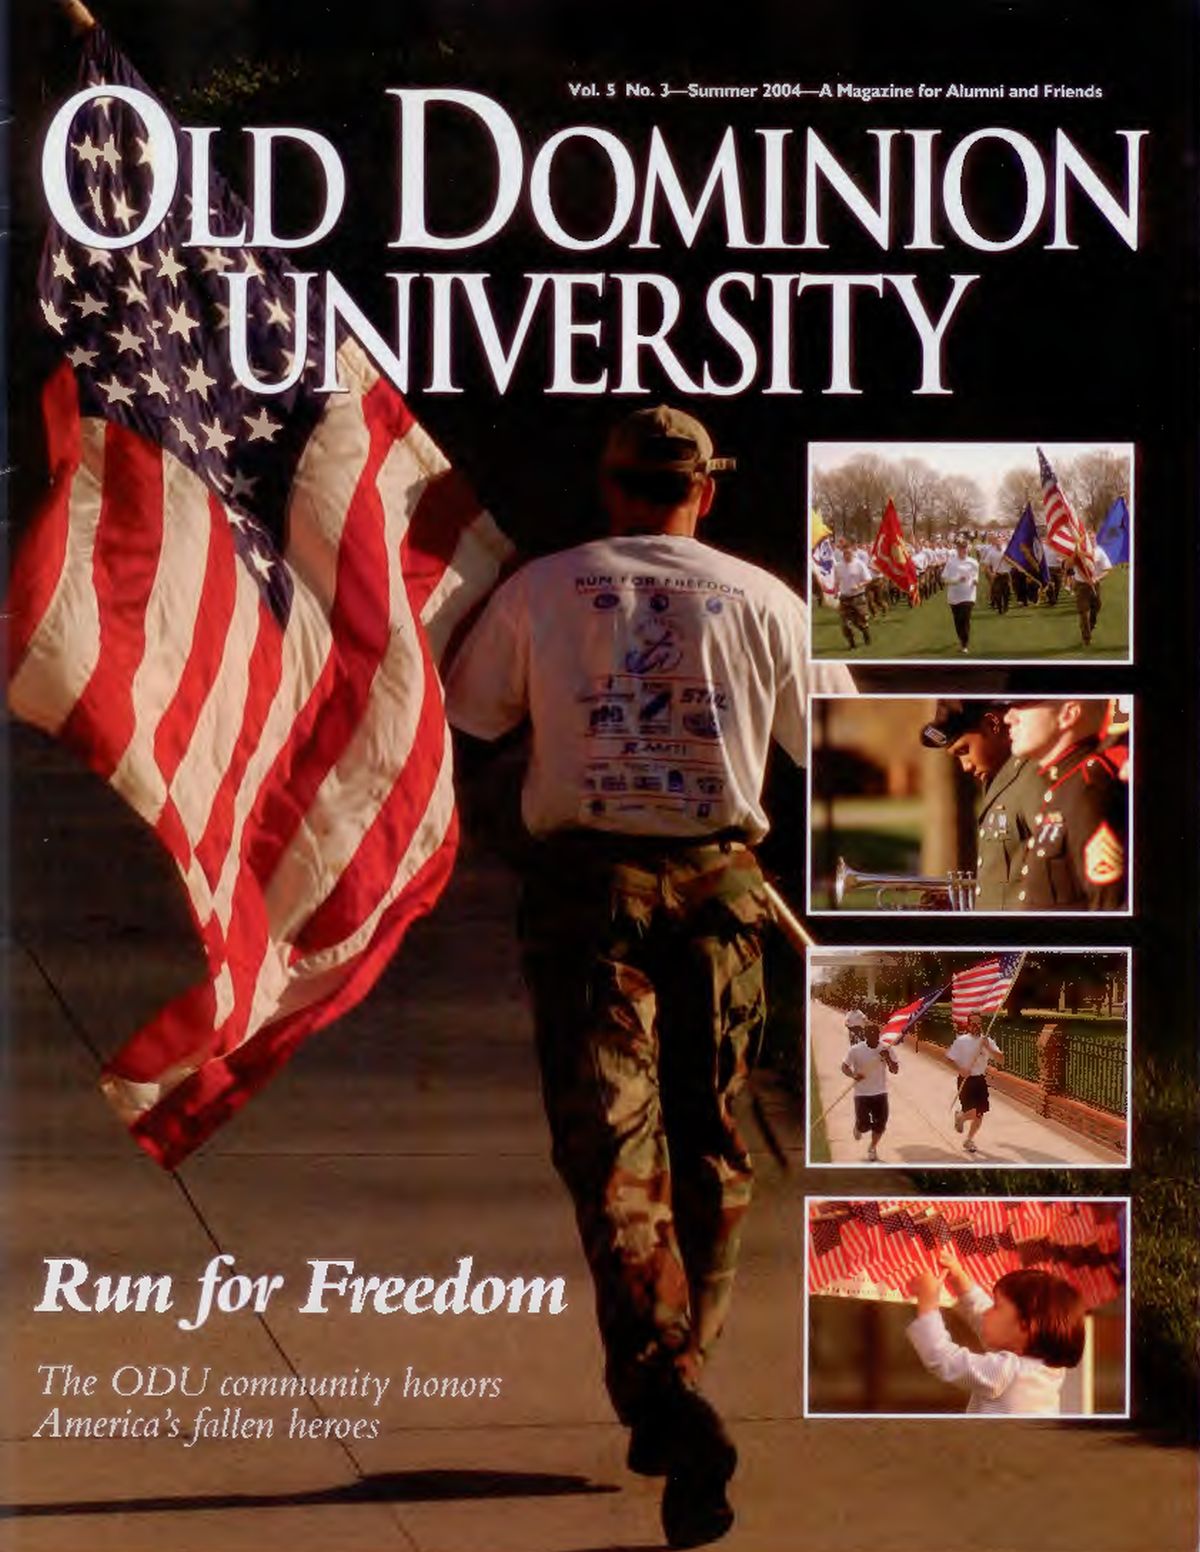 Run For Freedom